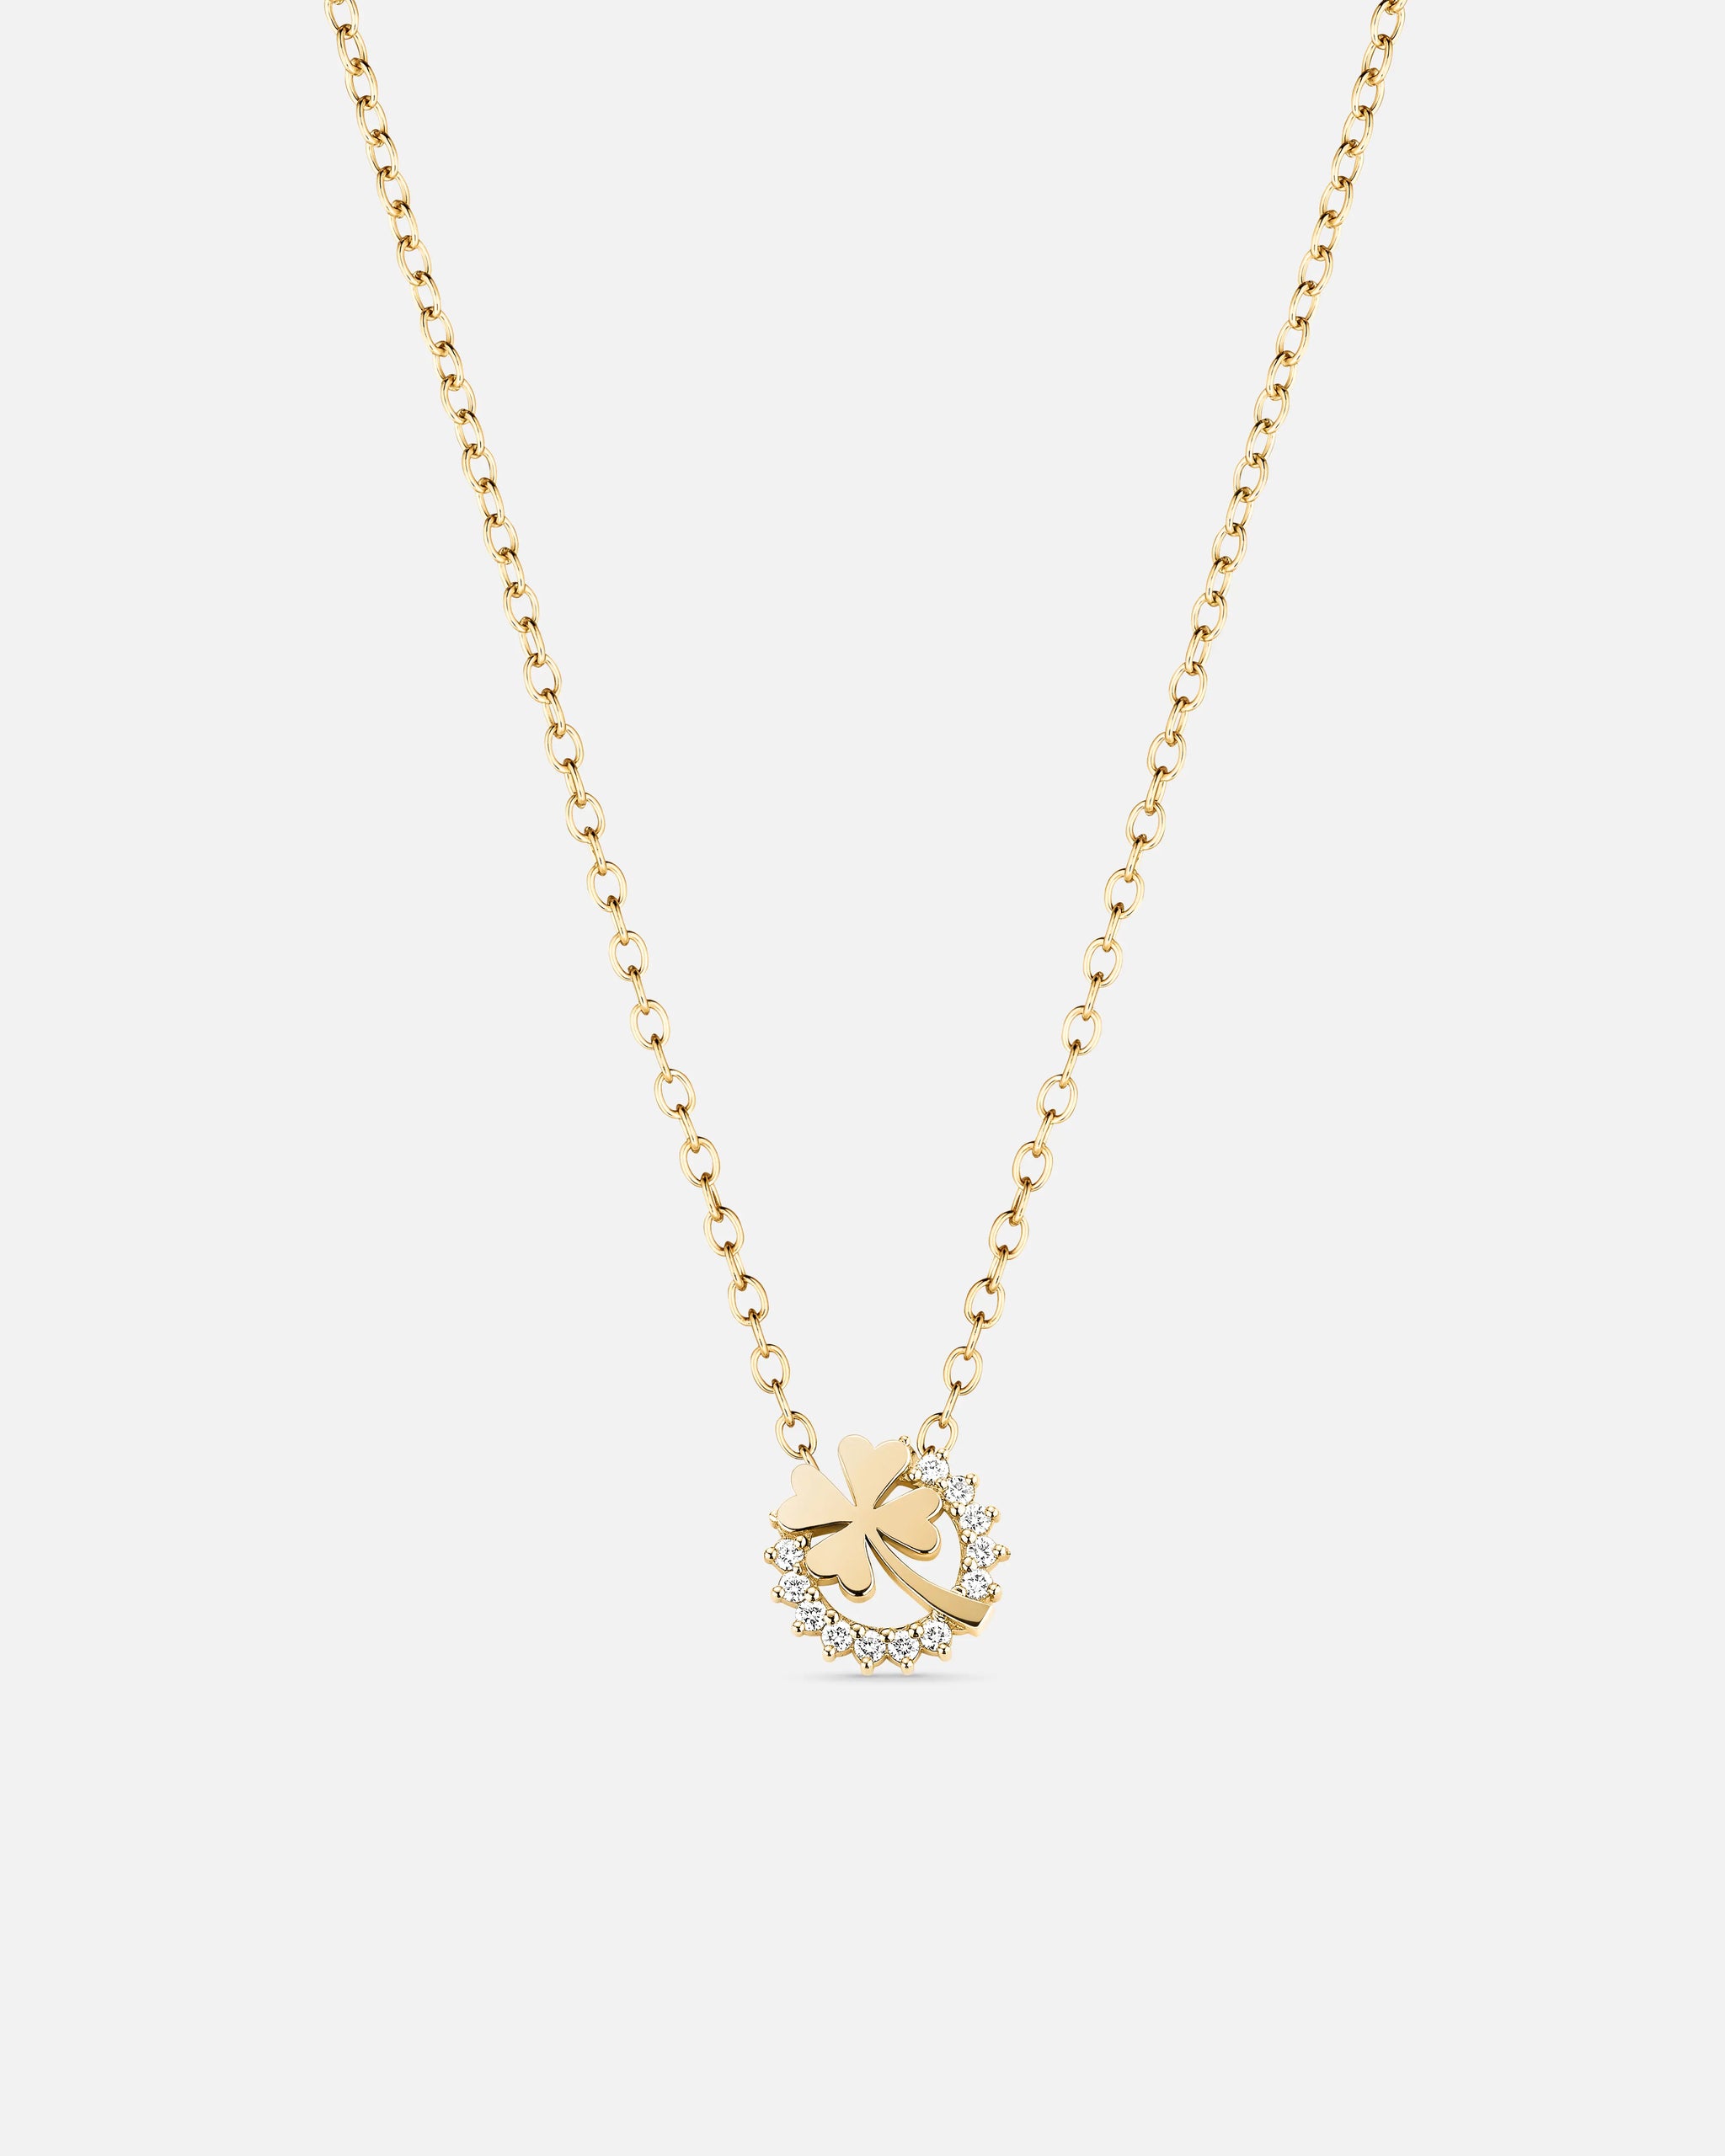 Medium Luck Pendant in Yellow Gold - 1 - Nouvel Heritage